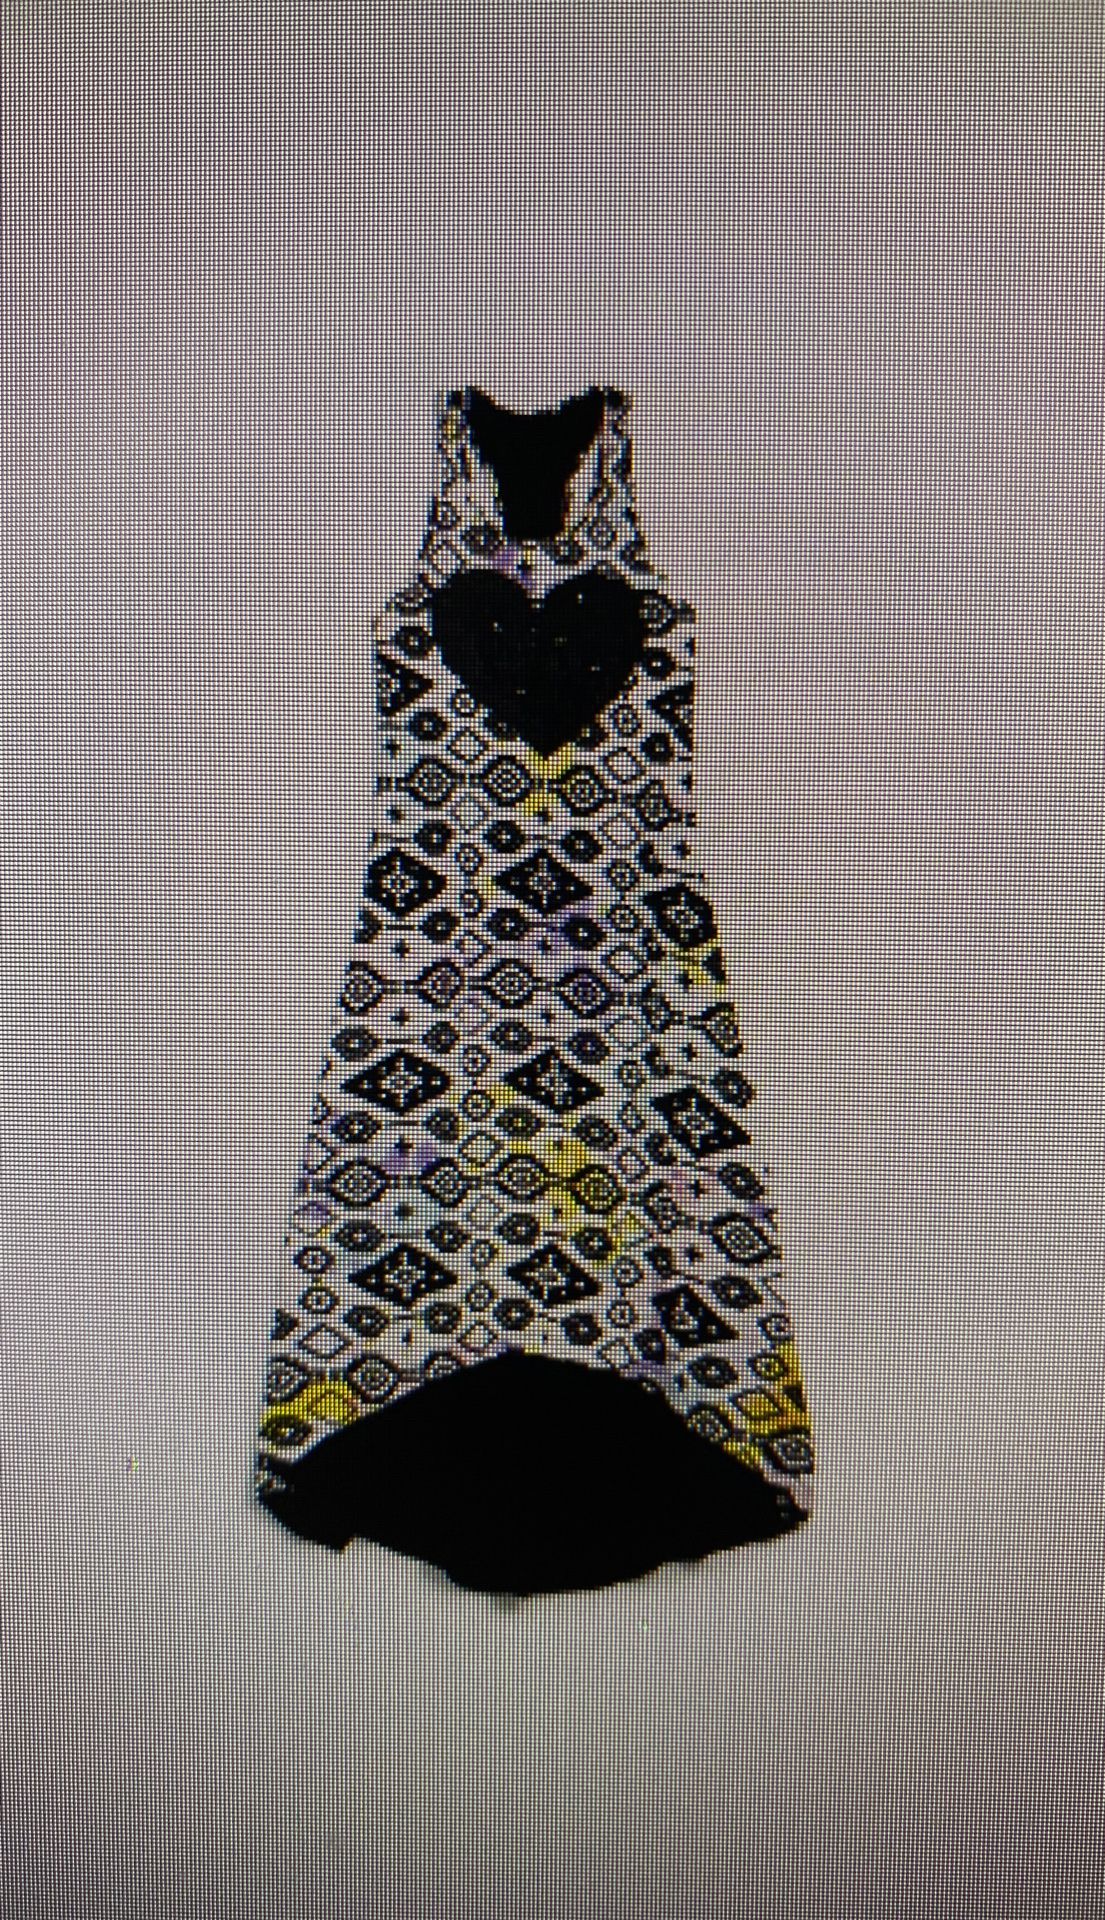 Sequin Heart Maxi Dress by Flowers by Zoe - Dress for the girl 6 - 8 years old